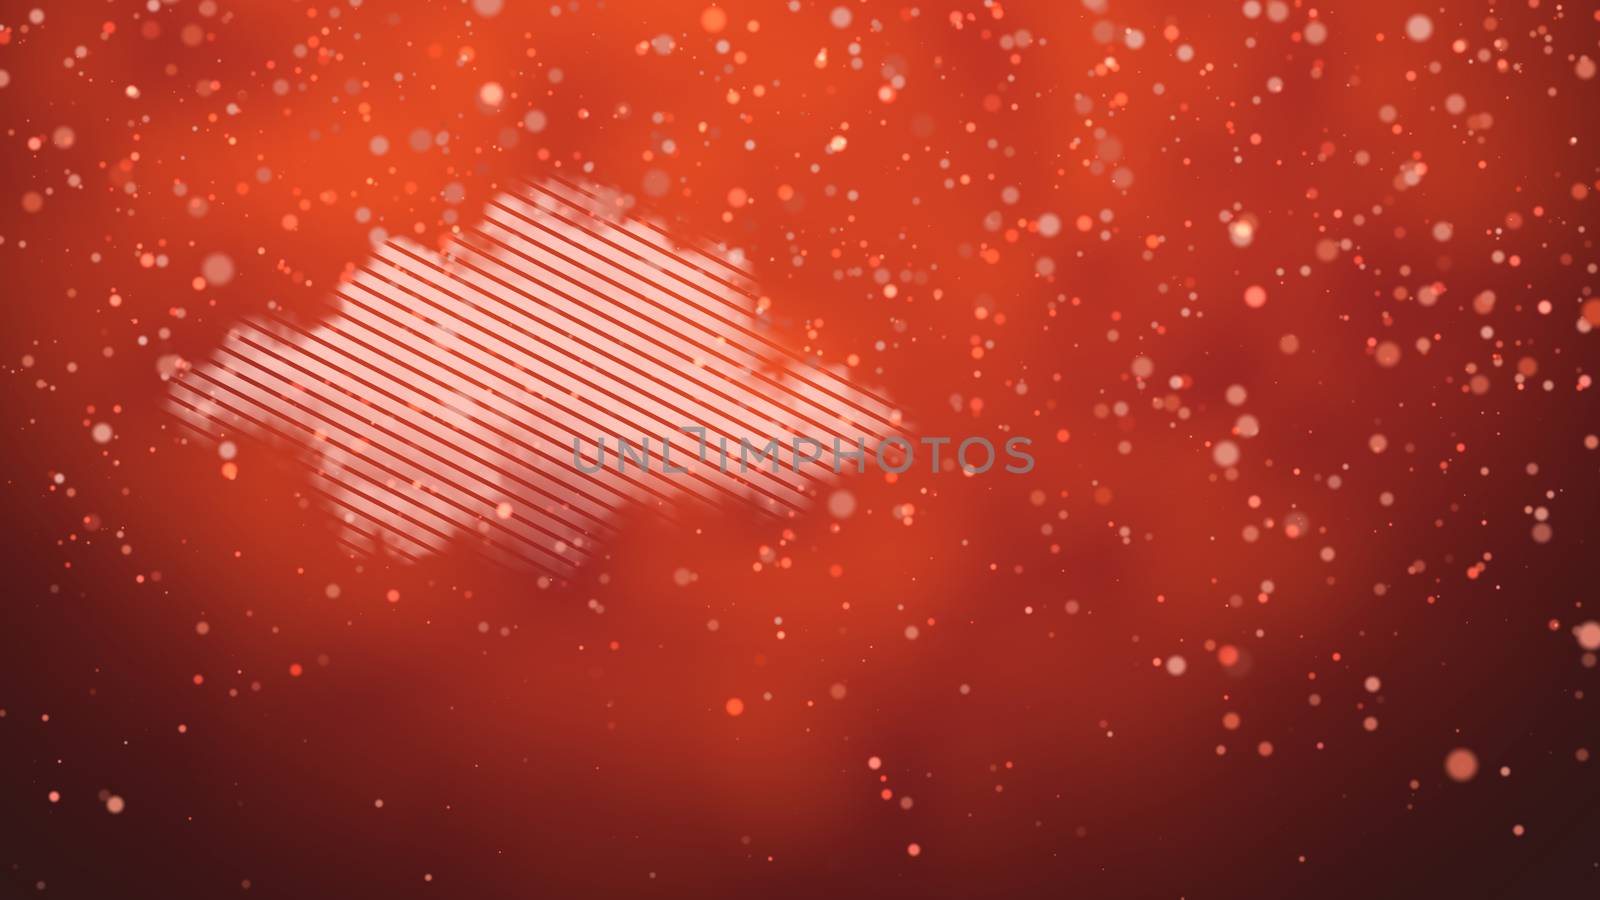 A striped cloud on a red background and particles. by klss